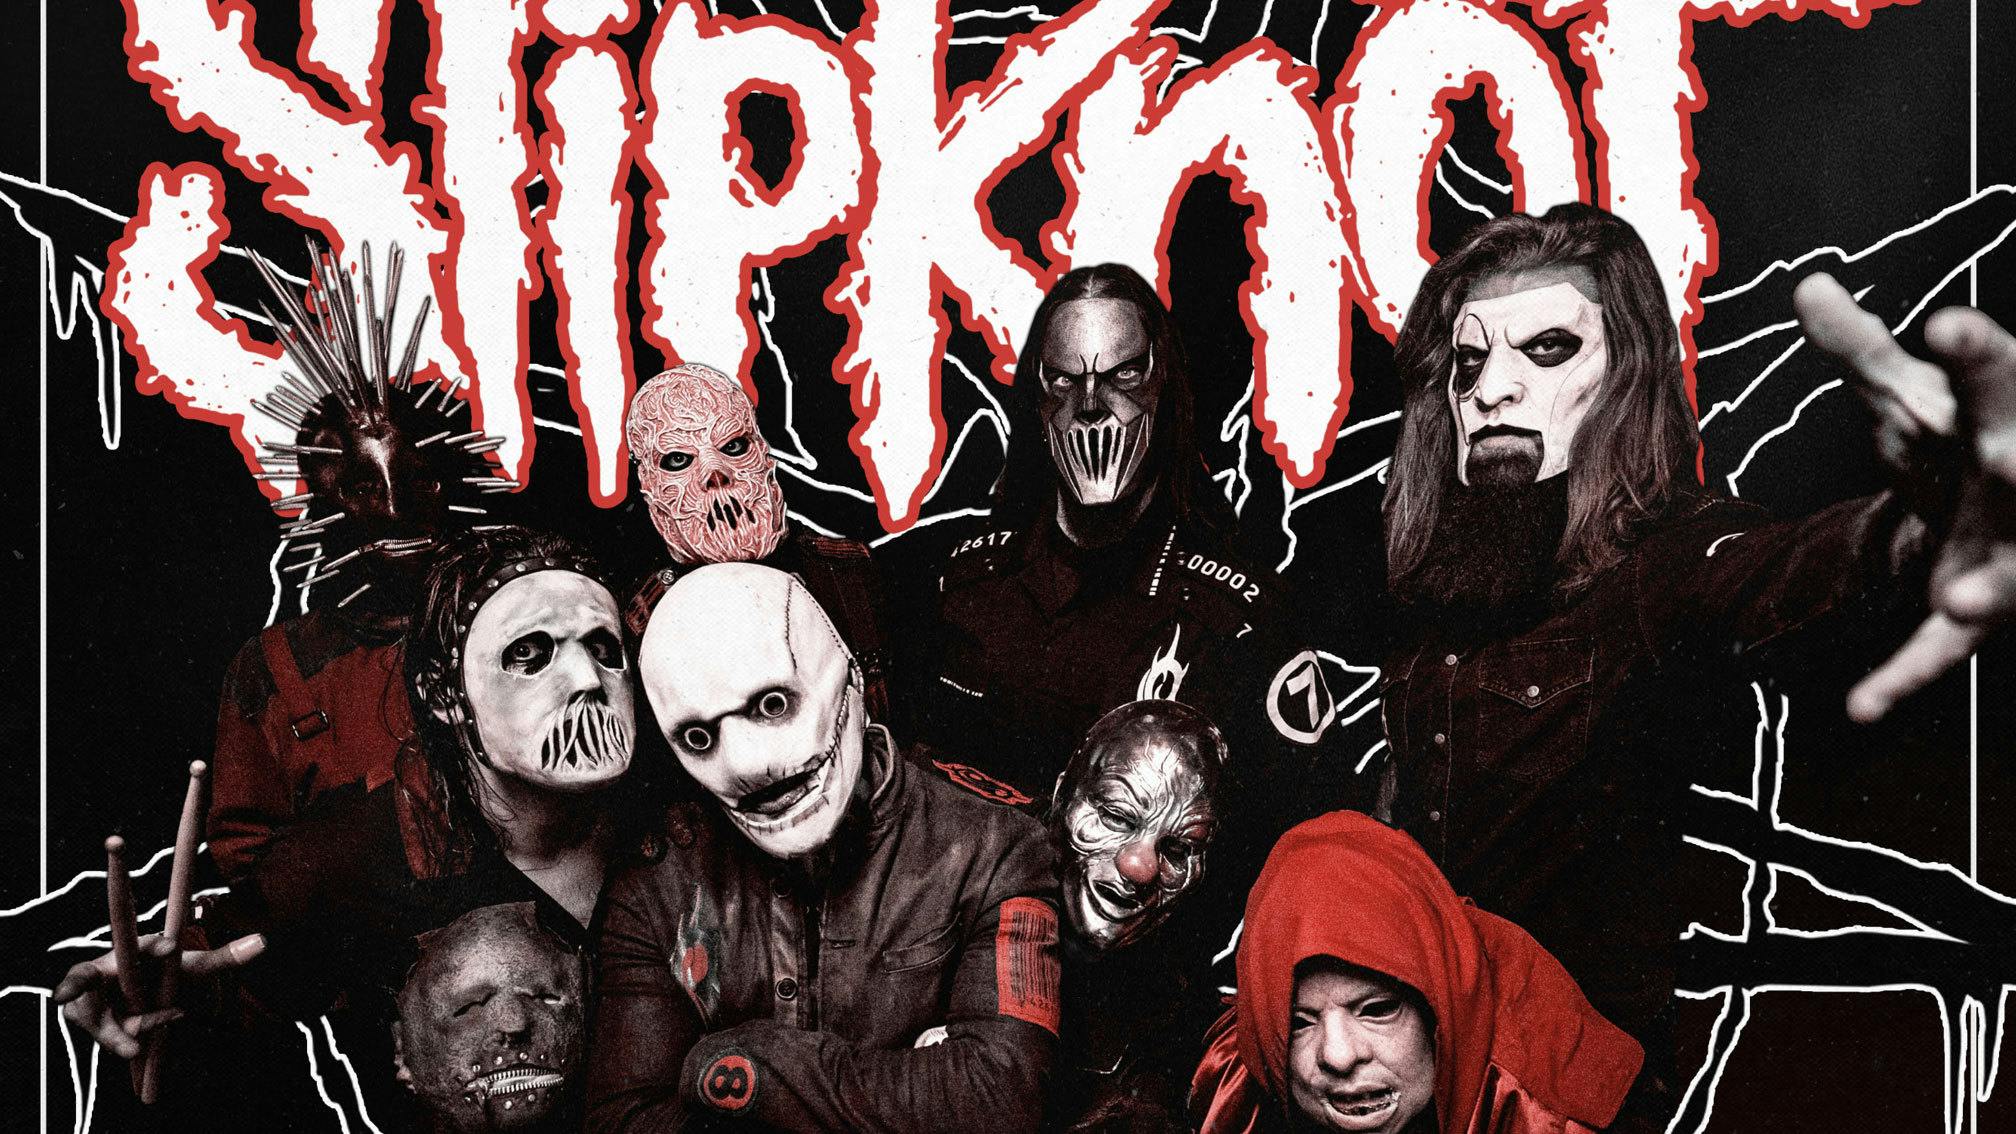 Slipknot announce Knotfest Roadshow fall tour with Ice Nine Kills and Crown The Empire